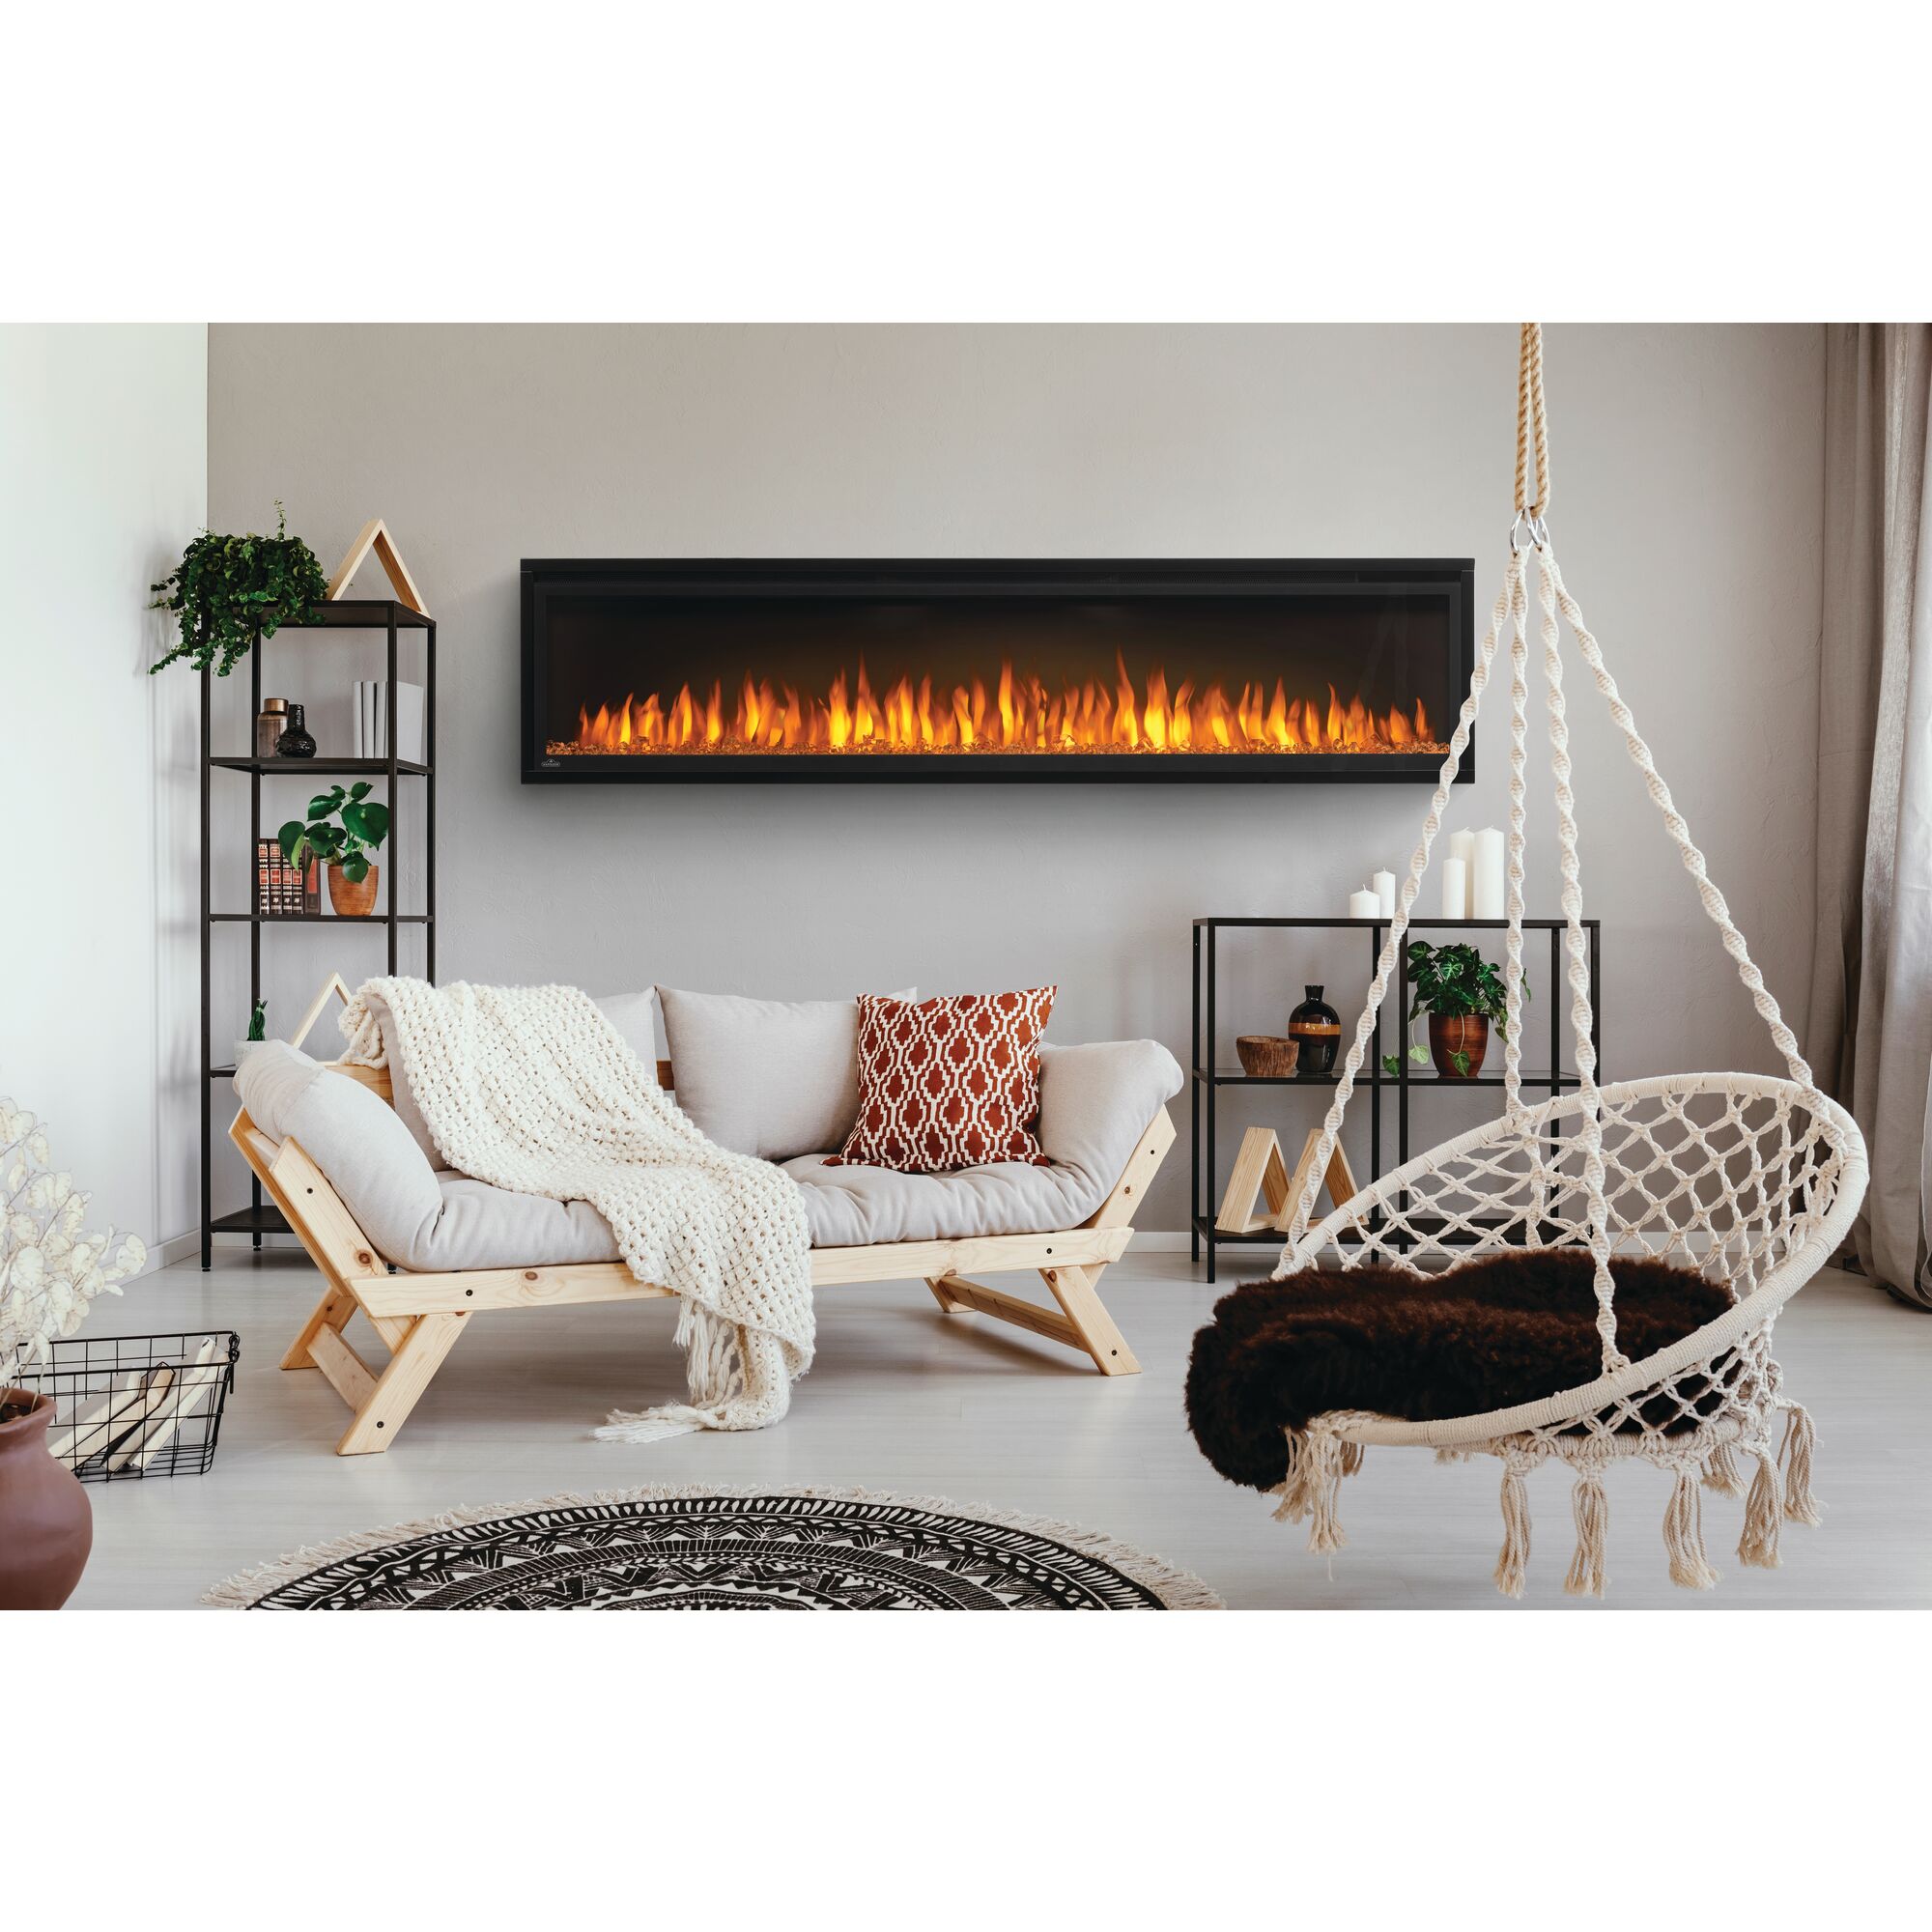 Image Napoleon Entice 72 inches eletric fireplace                                                                                                           